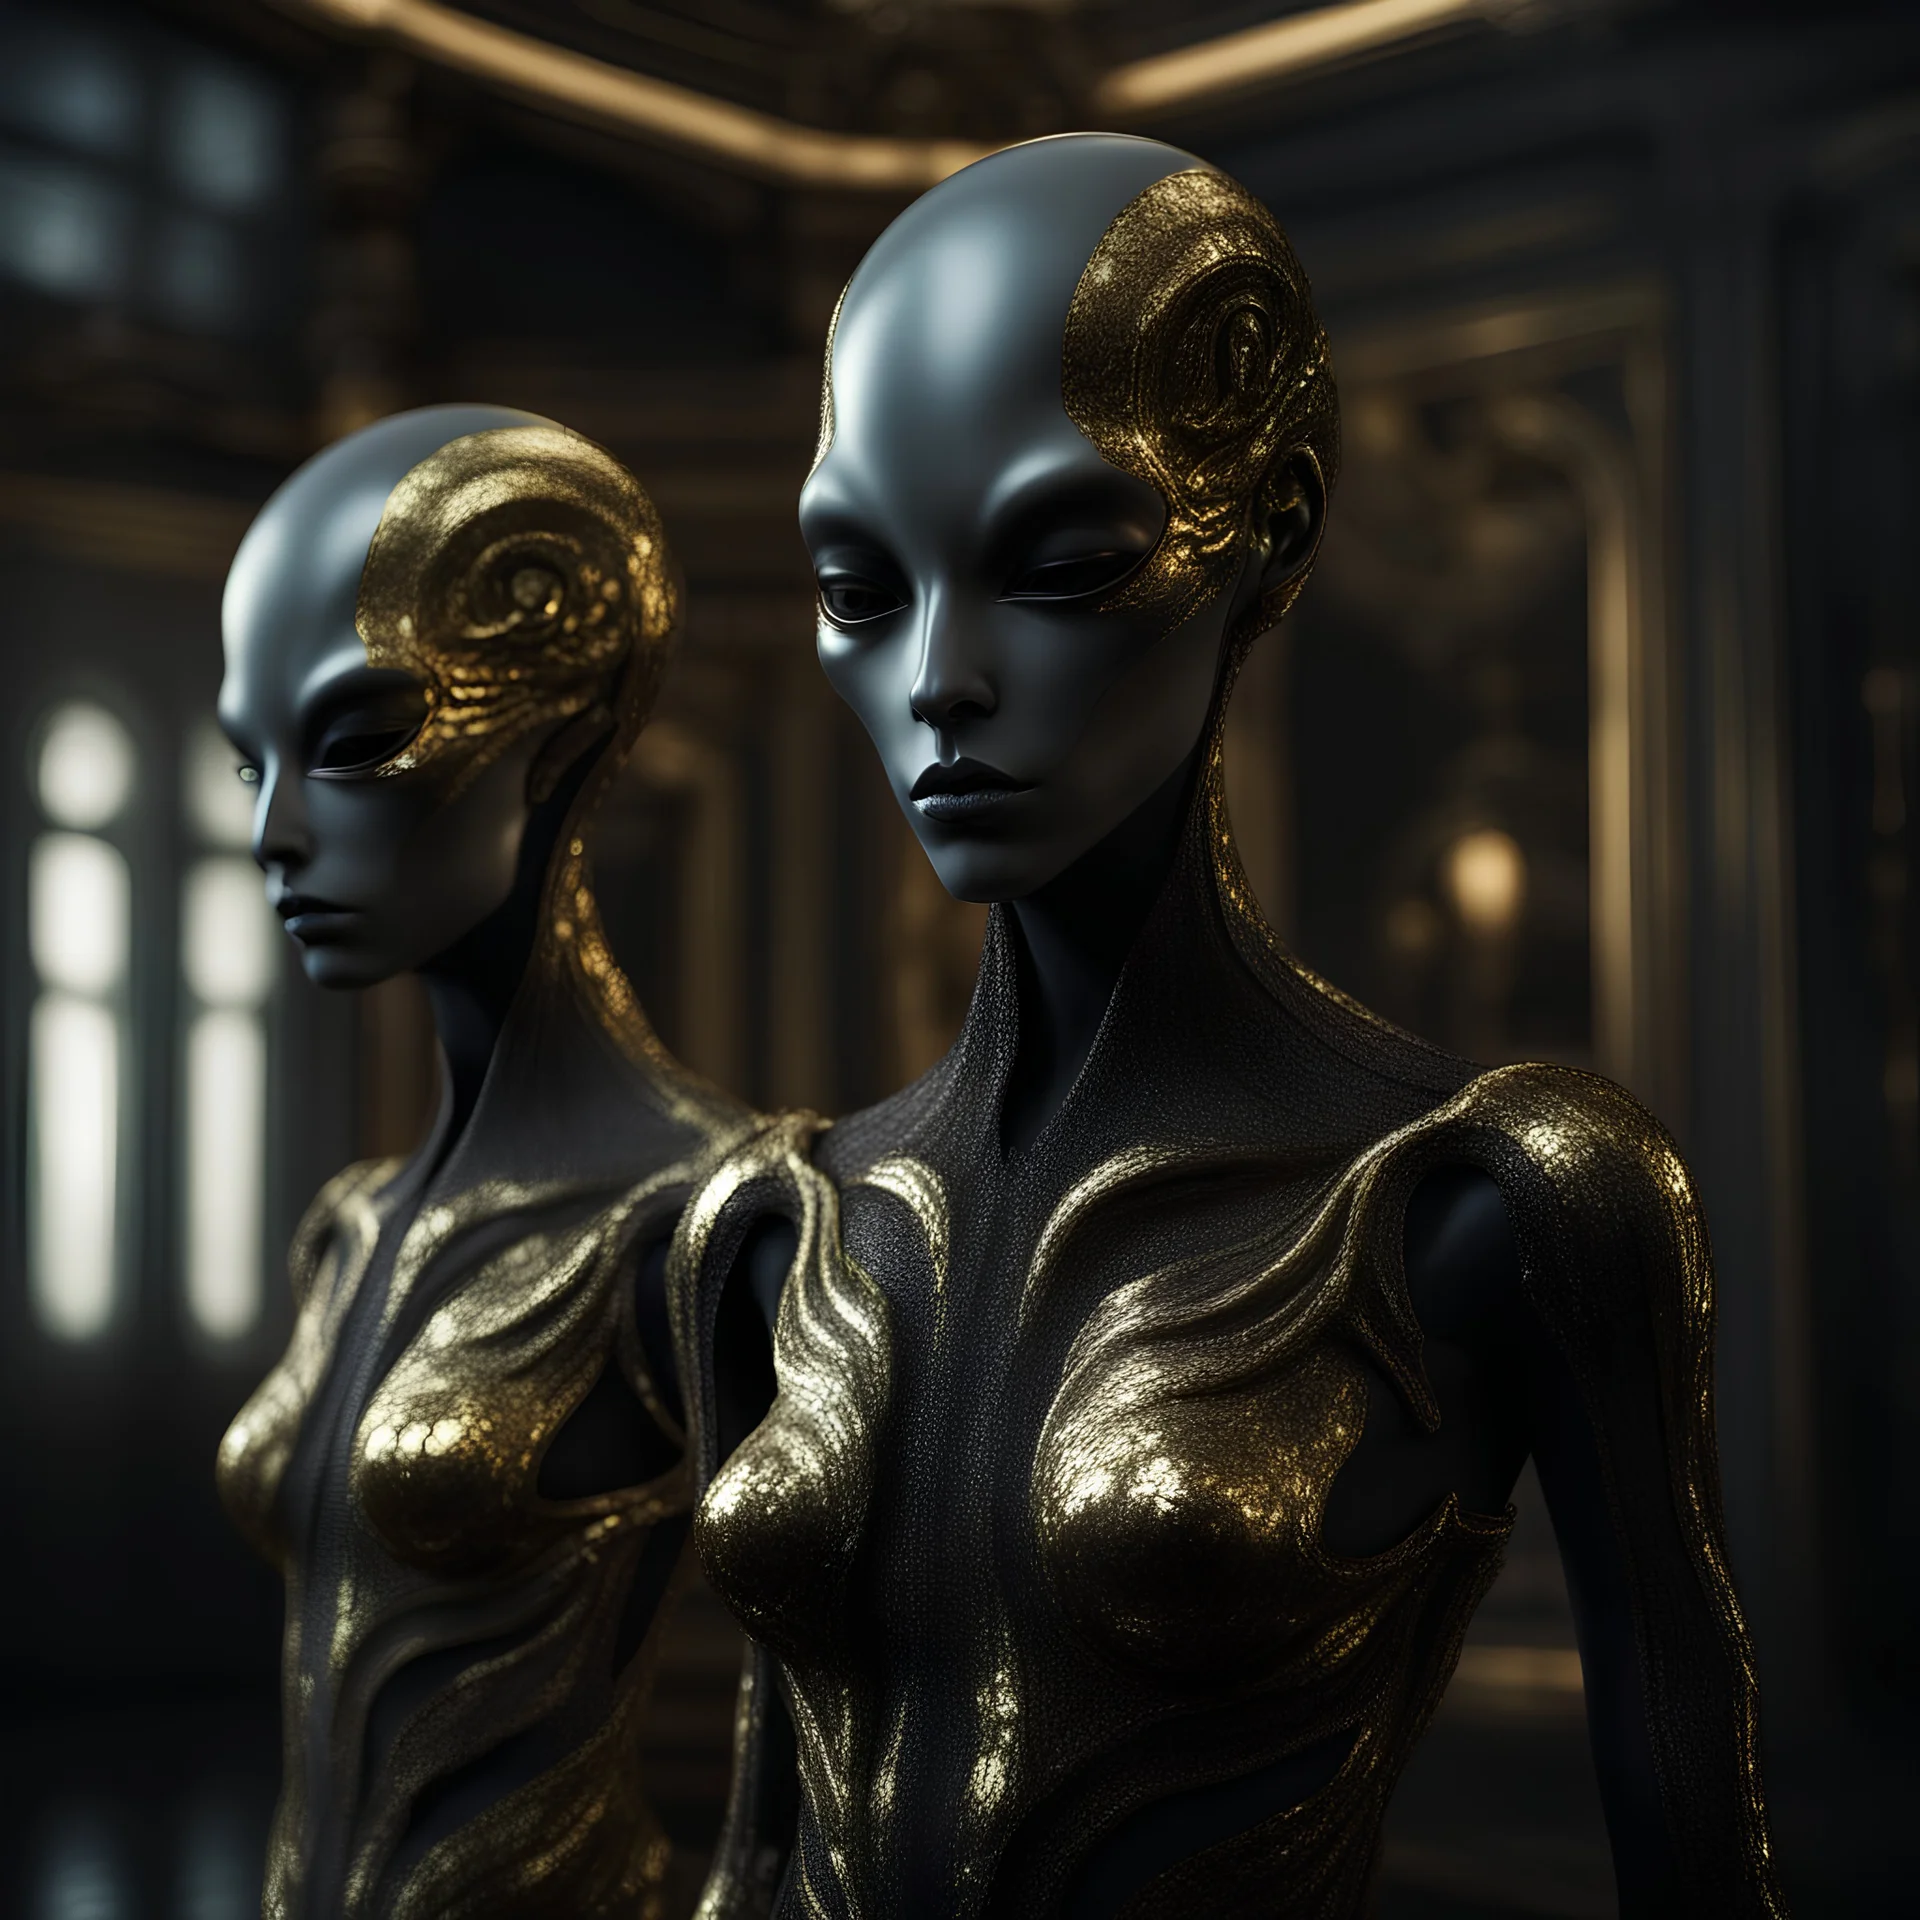 two exotic translucent grey alien in THE HOUSE OF MIRRORS, REFLECTIONS, extremely high quality high detail RAW color photo, beauty, luxury, GOLD-BLACK tones, glass textures, 3D mirror symmetry, ultra-photorealistic colors, Unreal Engine composition, cinematic color grading, ultra wide angle, deep depth of field, fog, surrealism